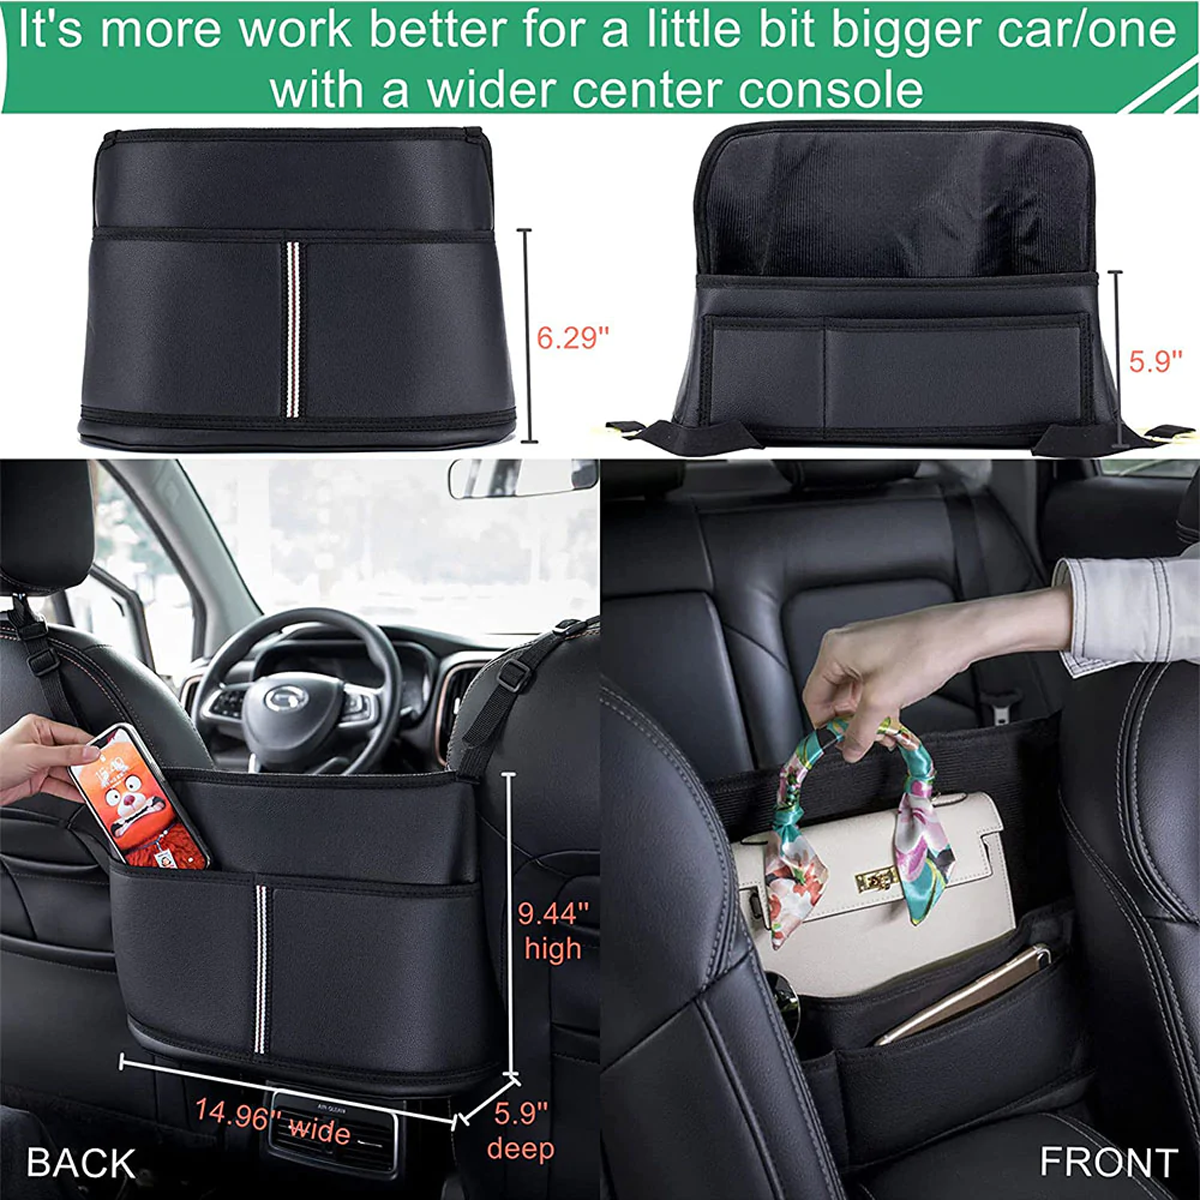 Custom Text For Car Purse Holder for Car Handbag Holder Between Seats Premium PU Leather, Compatible with All Cars, Auto Driver Or Passenger Accessories Organizer, Hanging Car Purse Storage Pocket Back Seat Pet Barrier FT11991